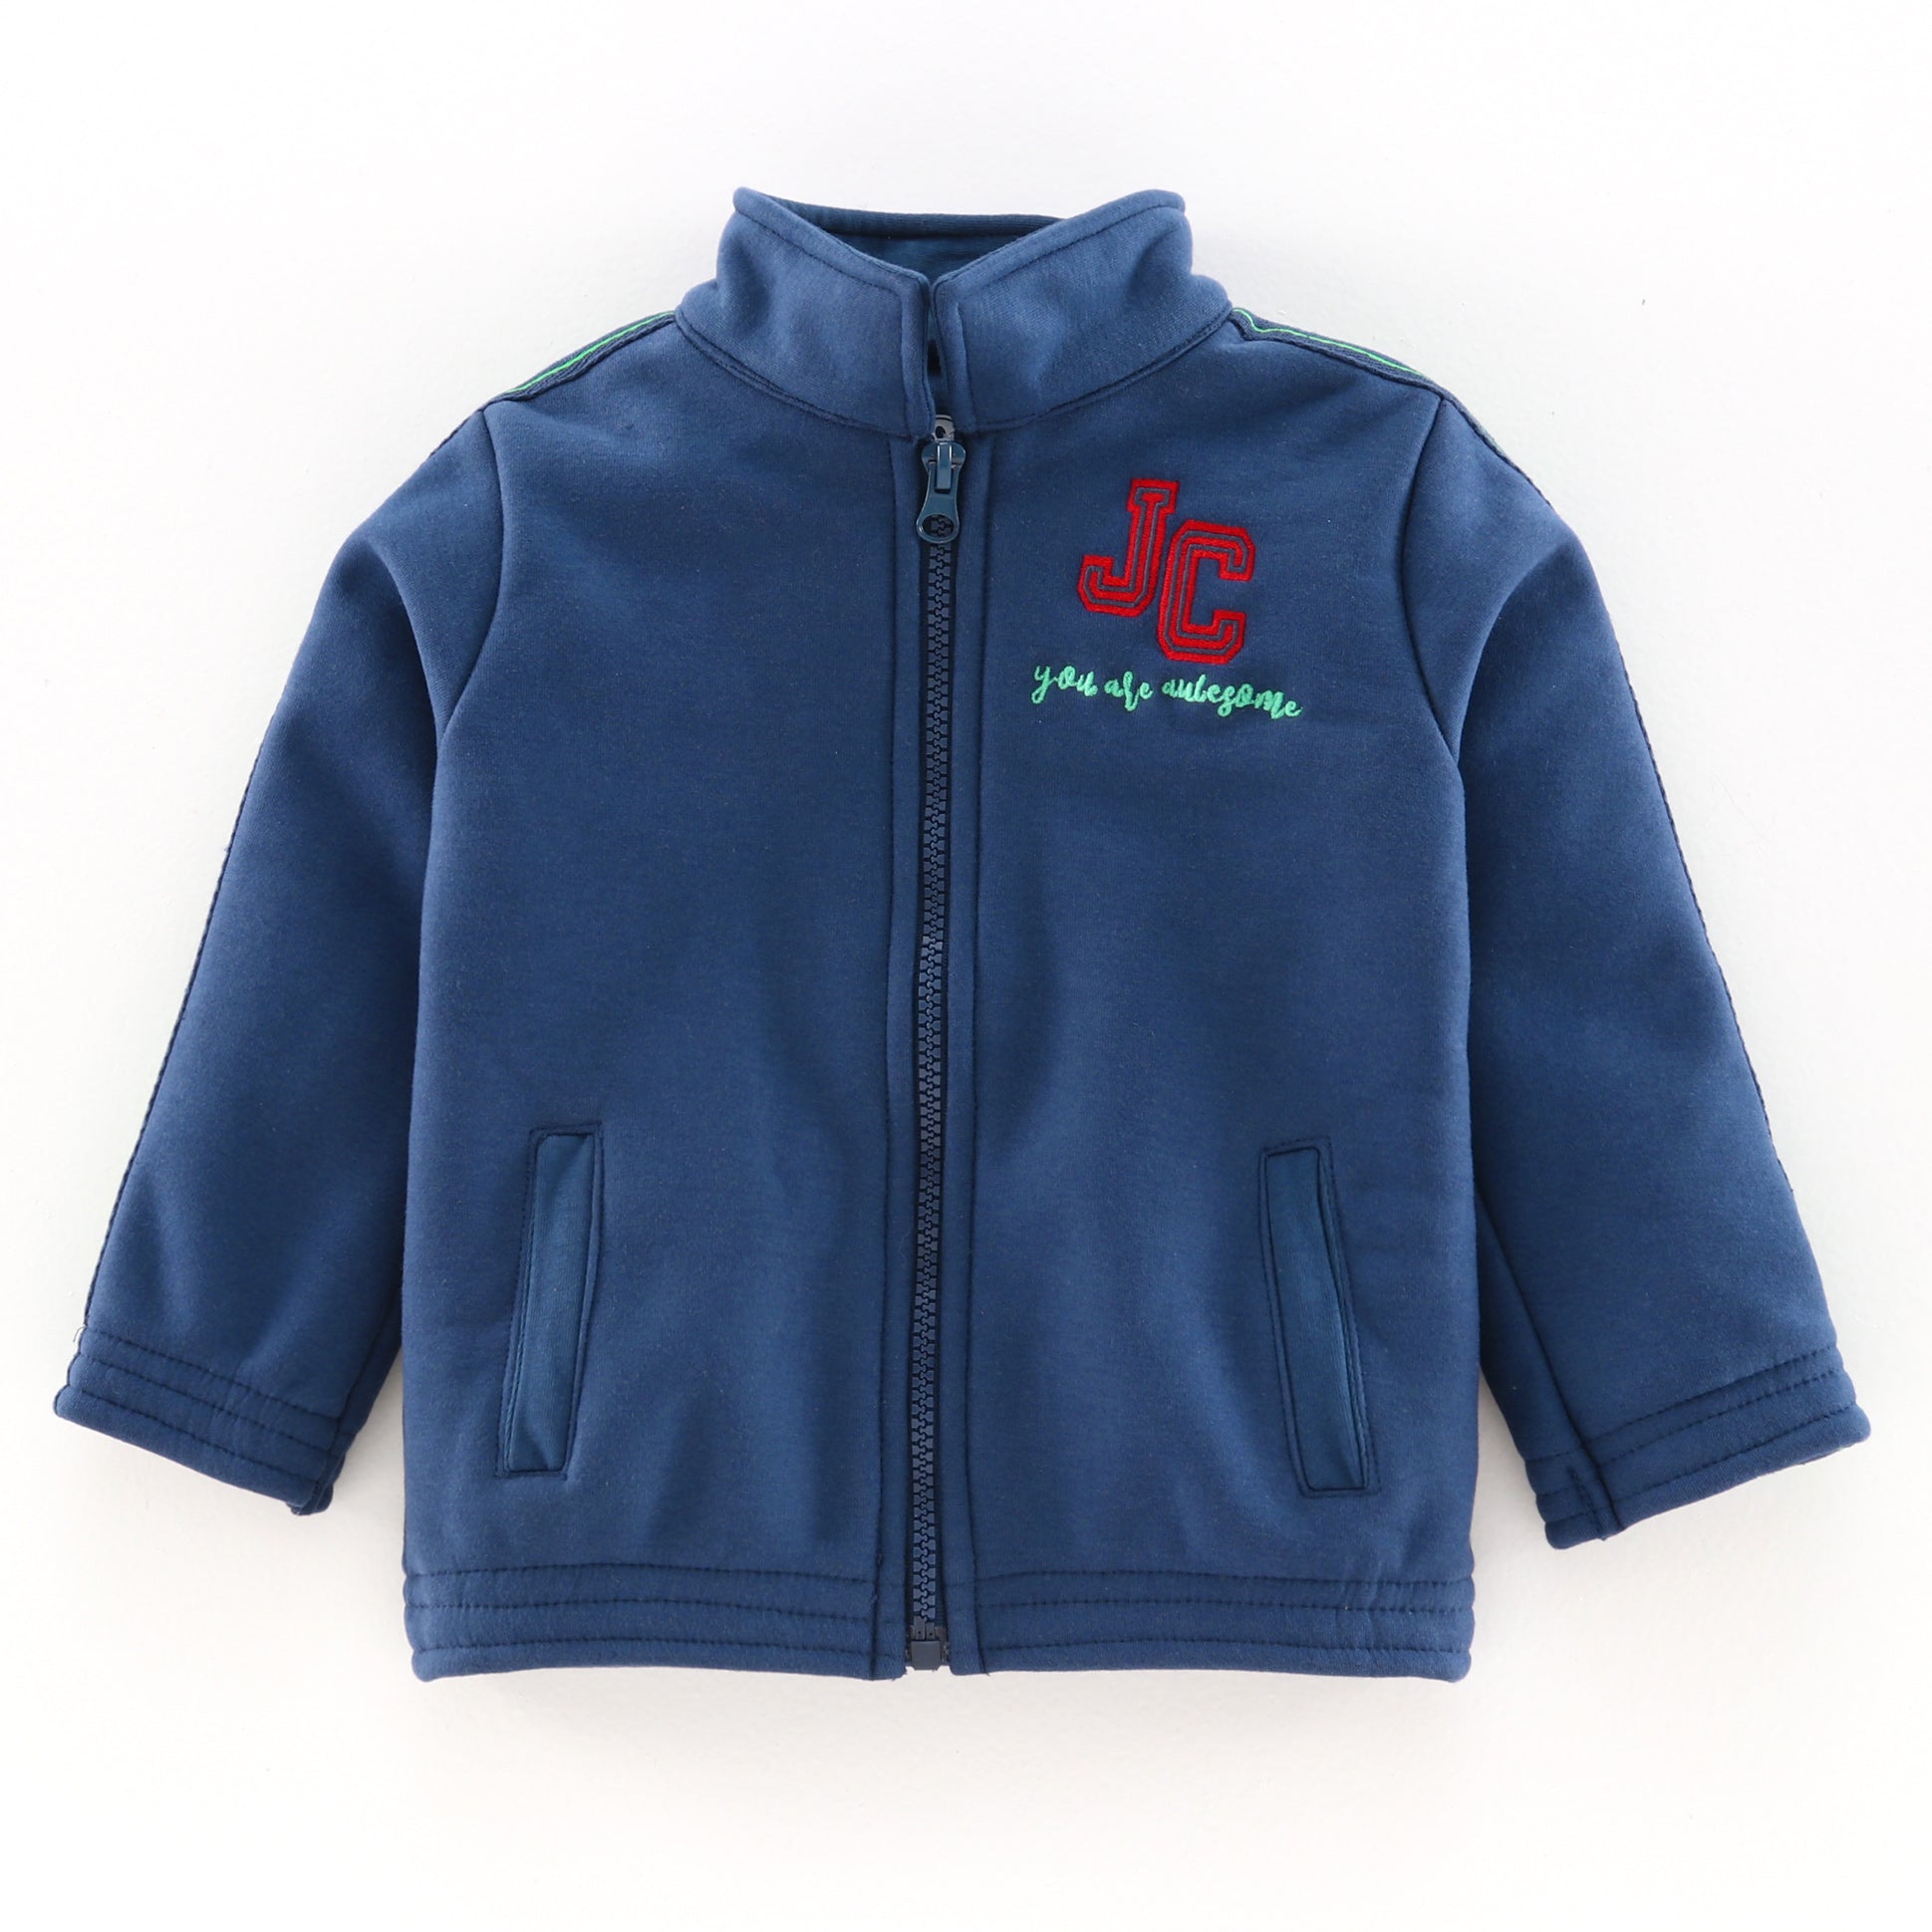 Girls JC You are Awesome With Zipper Hoodie Jacket - Navy